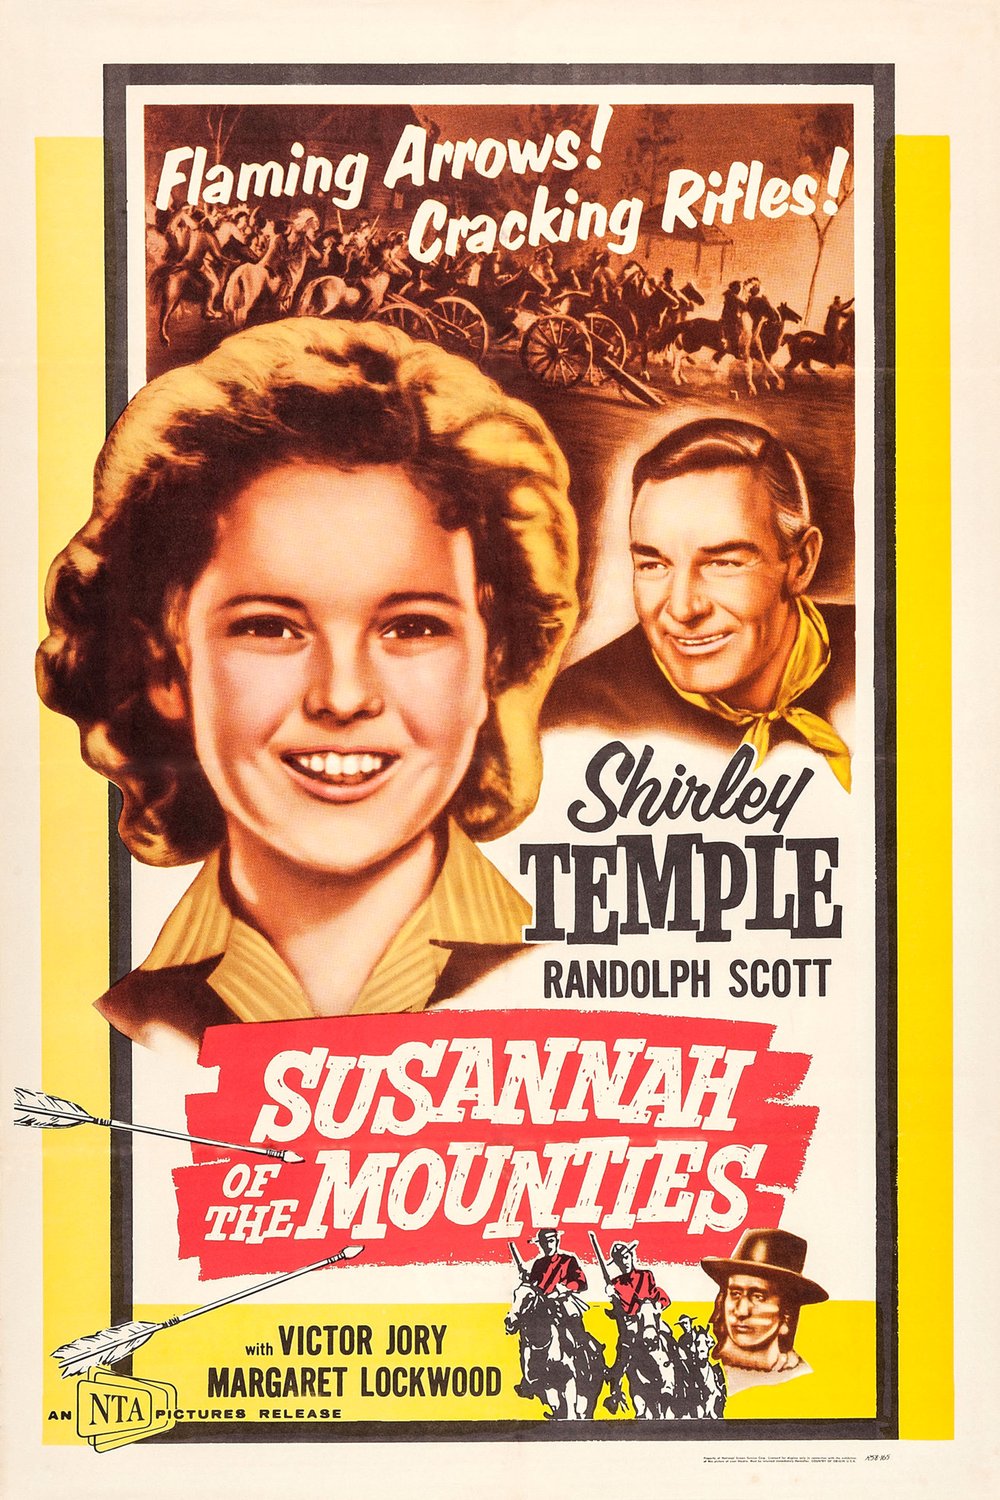 Poster of the movie Susannah of the Mounties